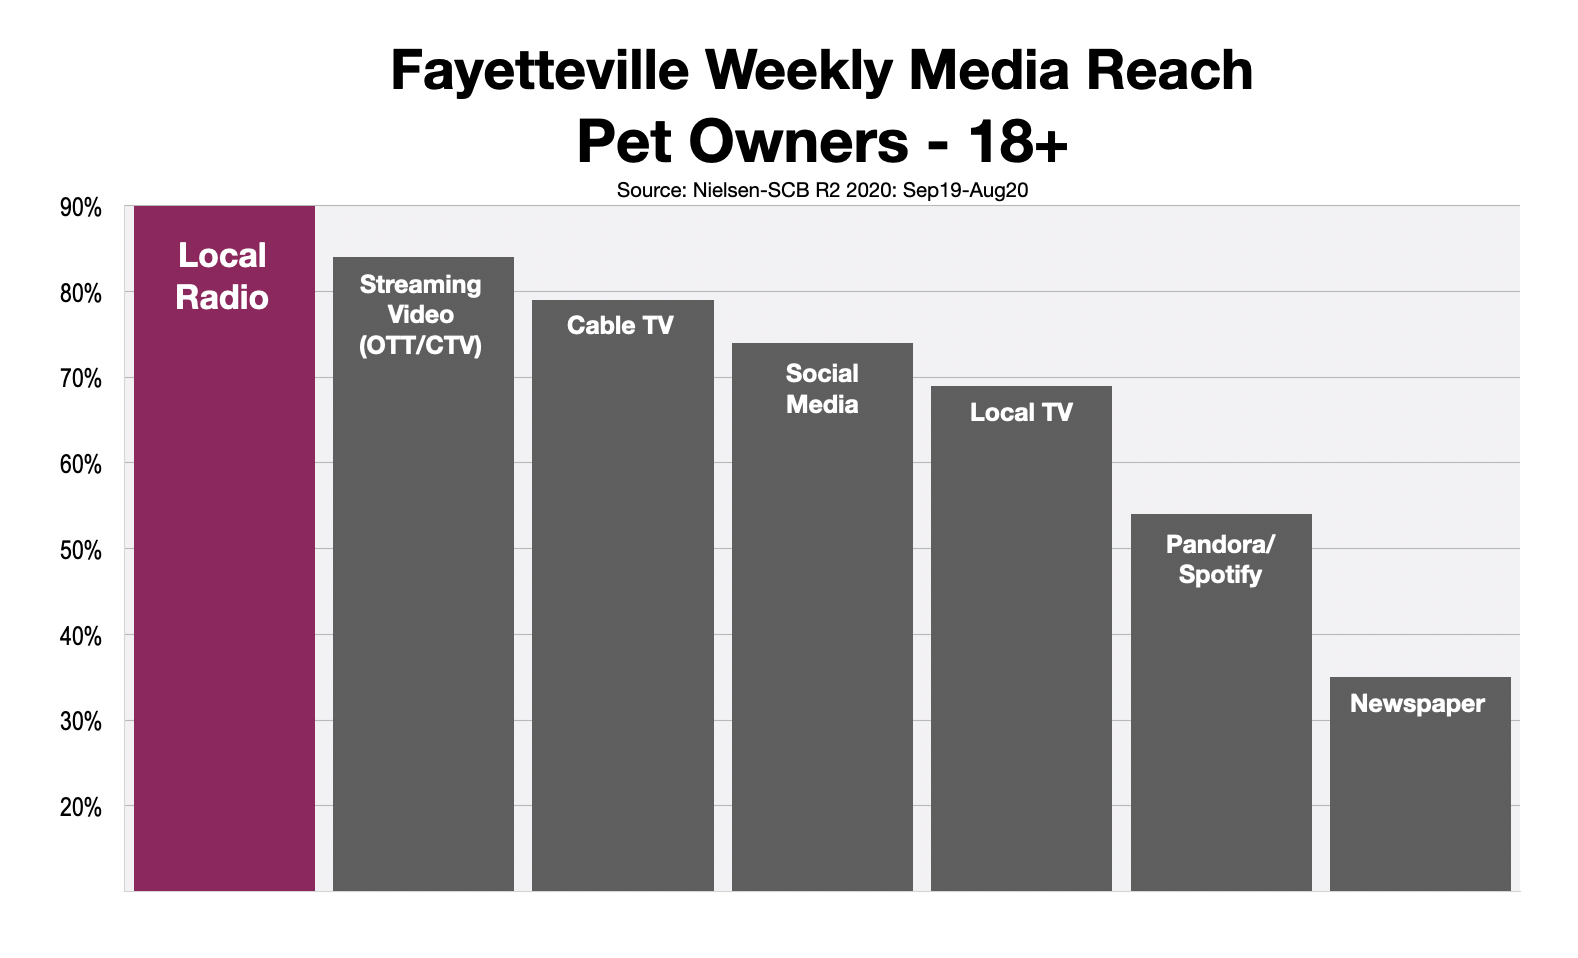 Advertise To Pet Owners in Fayetteville, North Carolina